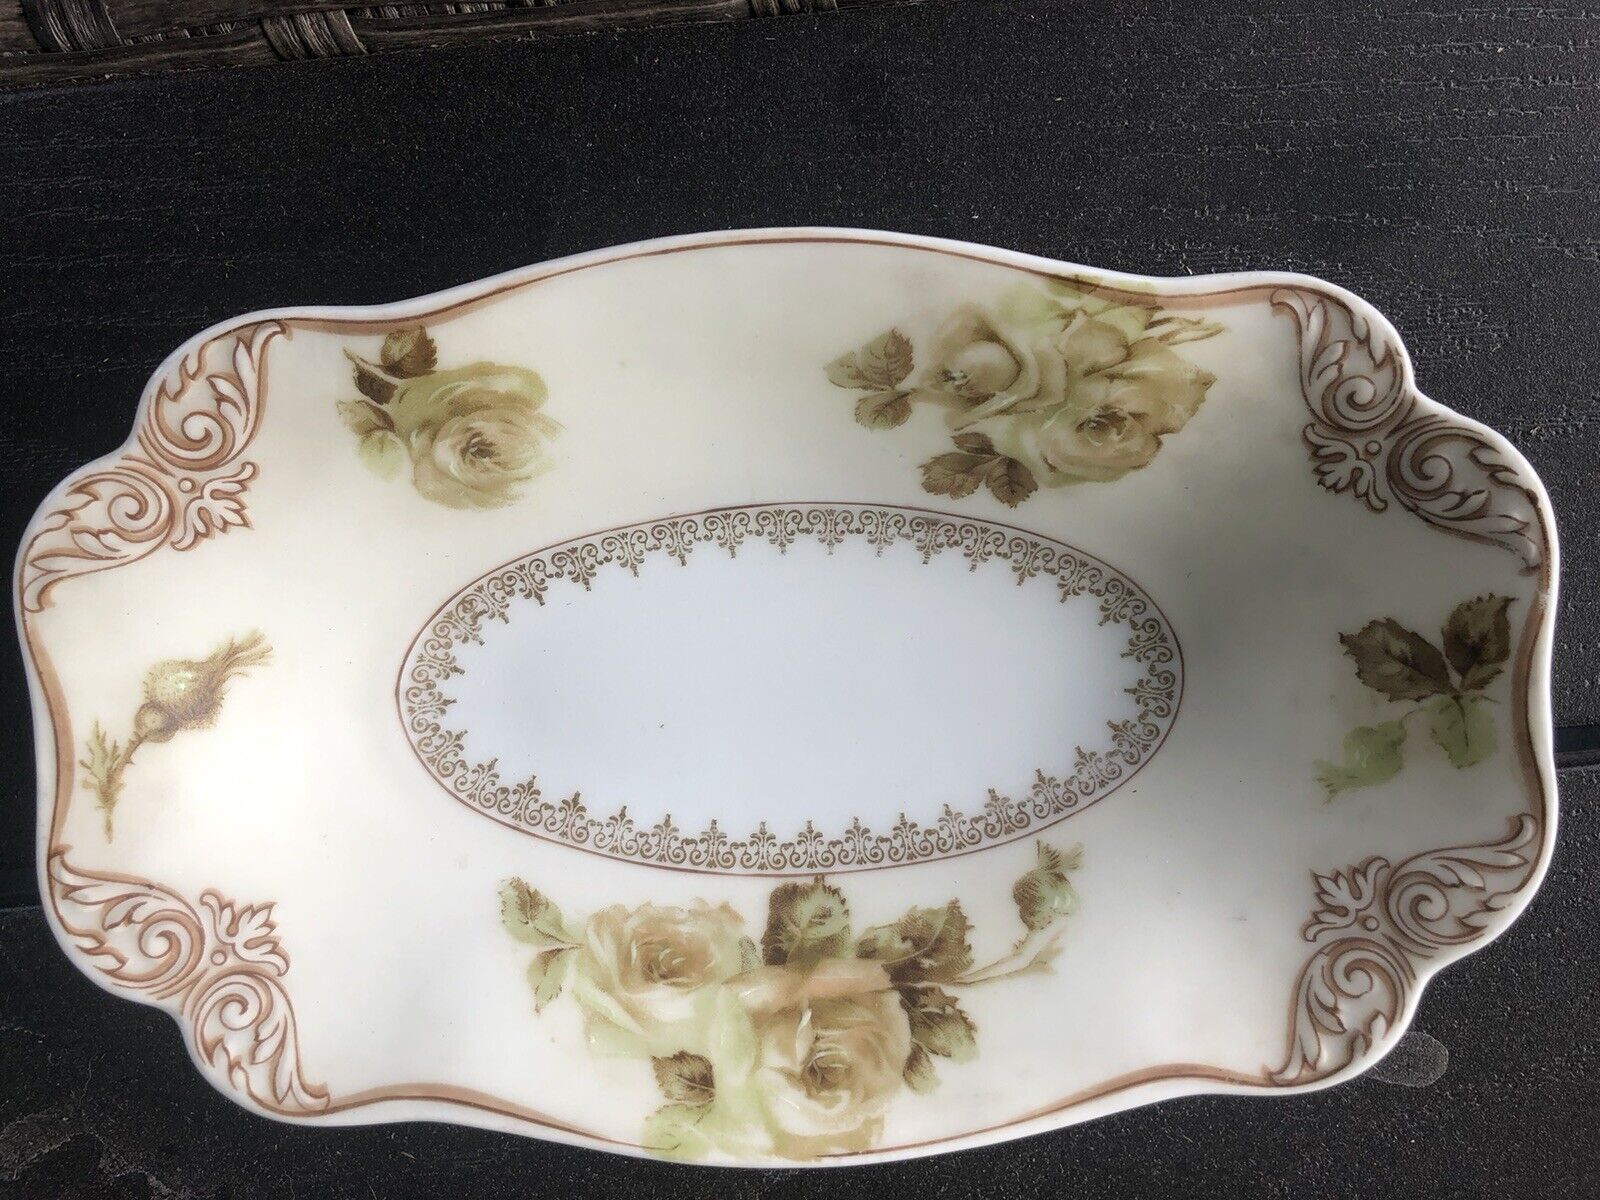 HERMANN OHME SILESIA OLD IVORY CLAIRON ROSES RELISH SERVING DISH 6.1/4